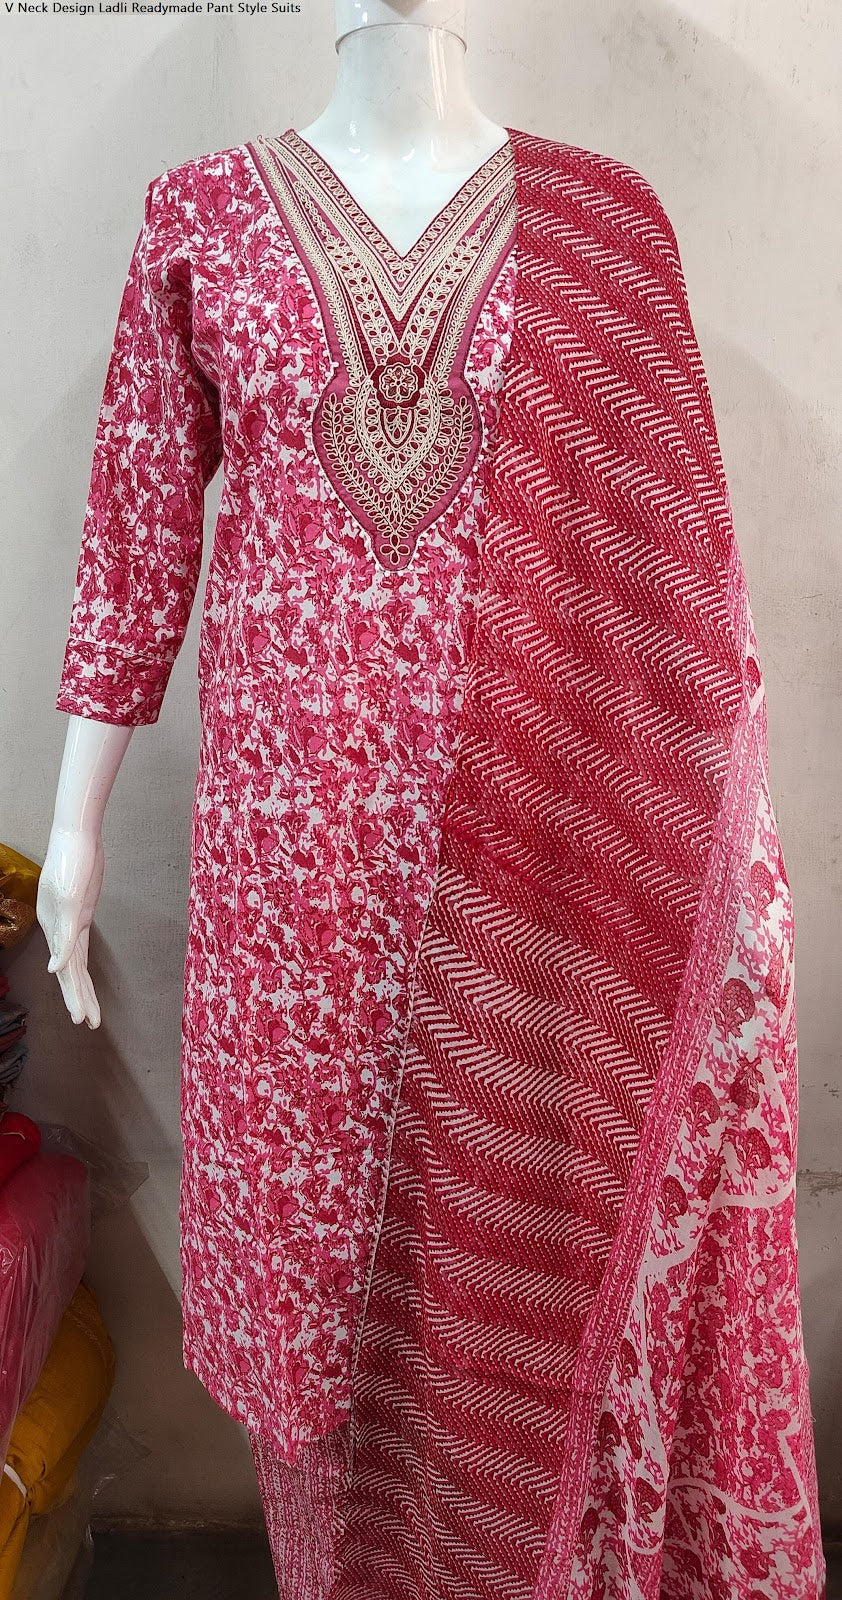 V Neck Design Ladli Cotton Cambric Readymade Pant Style Suits Supplier India